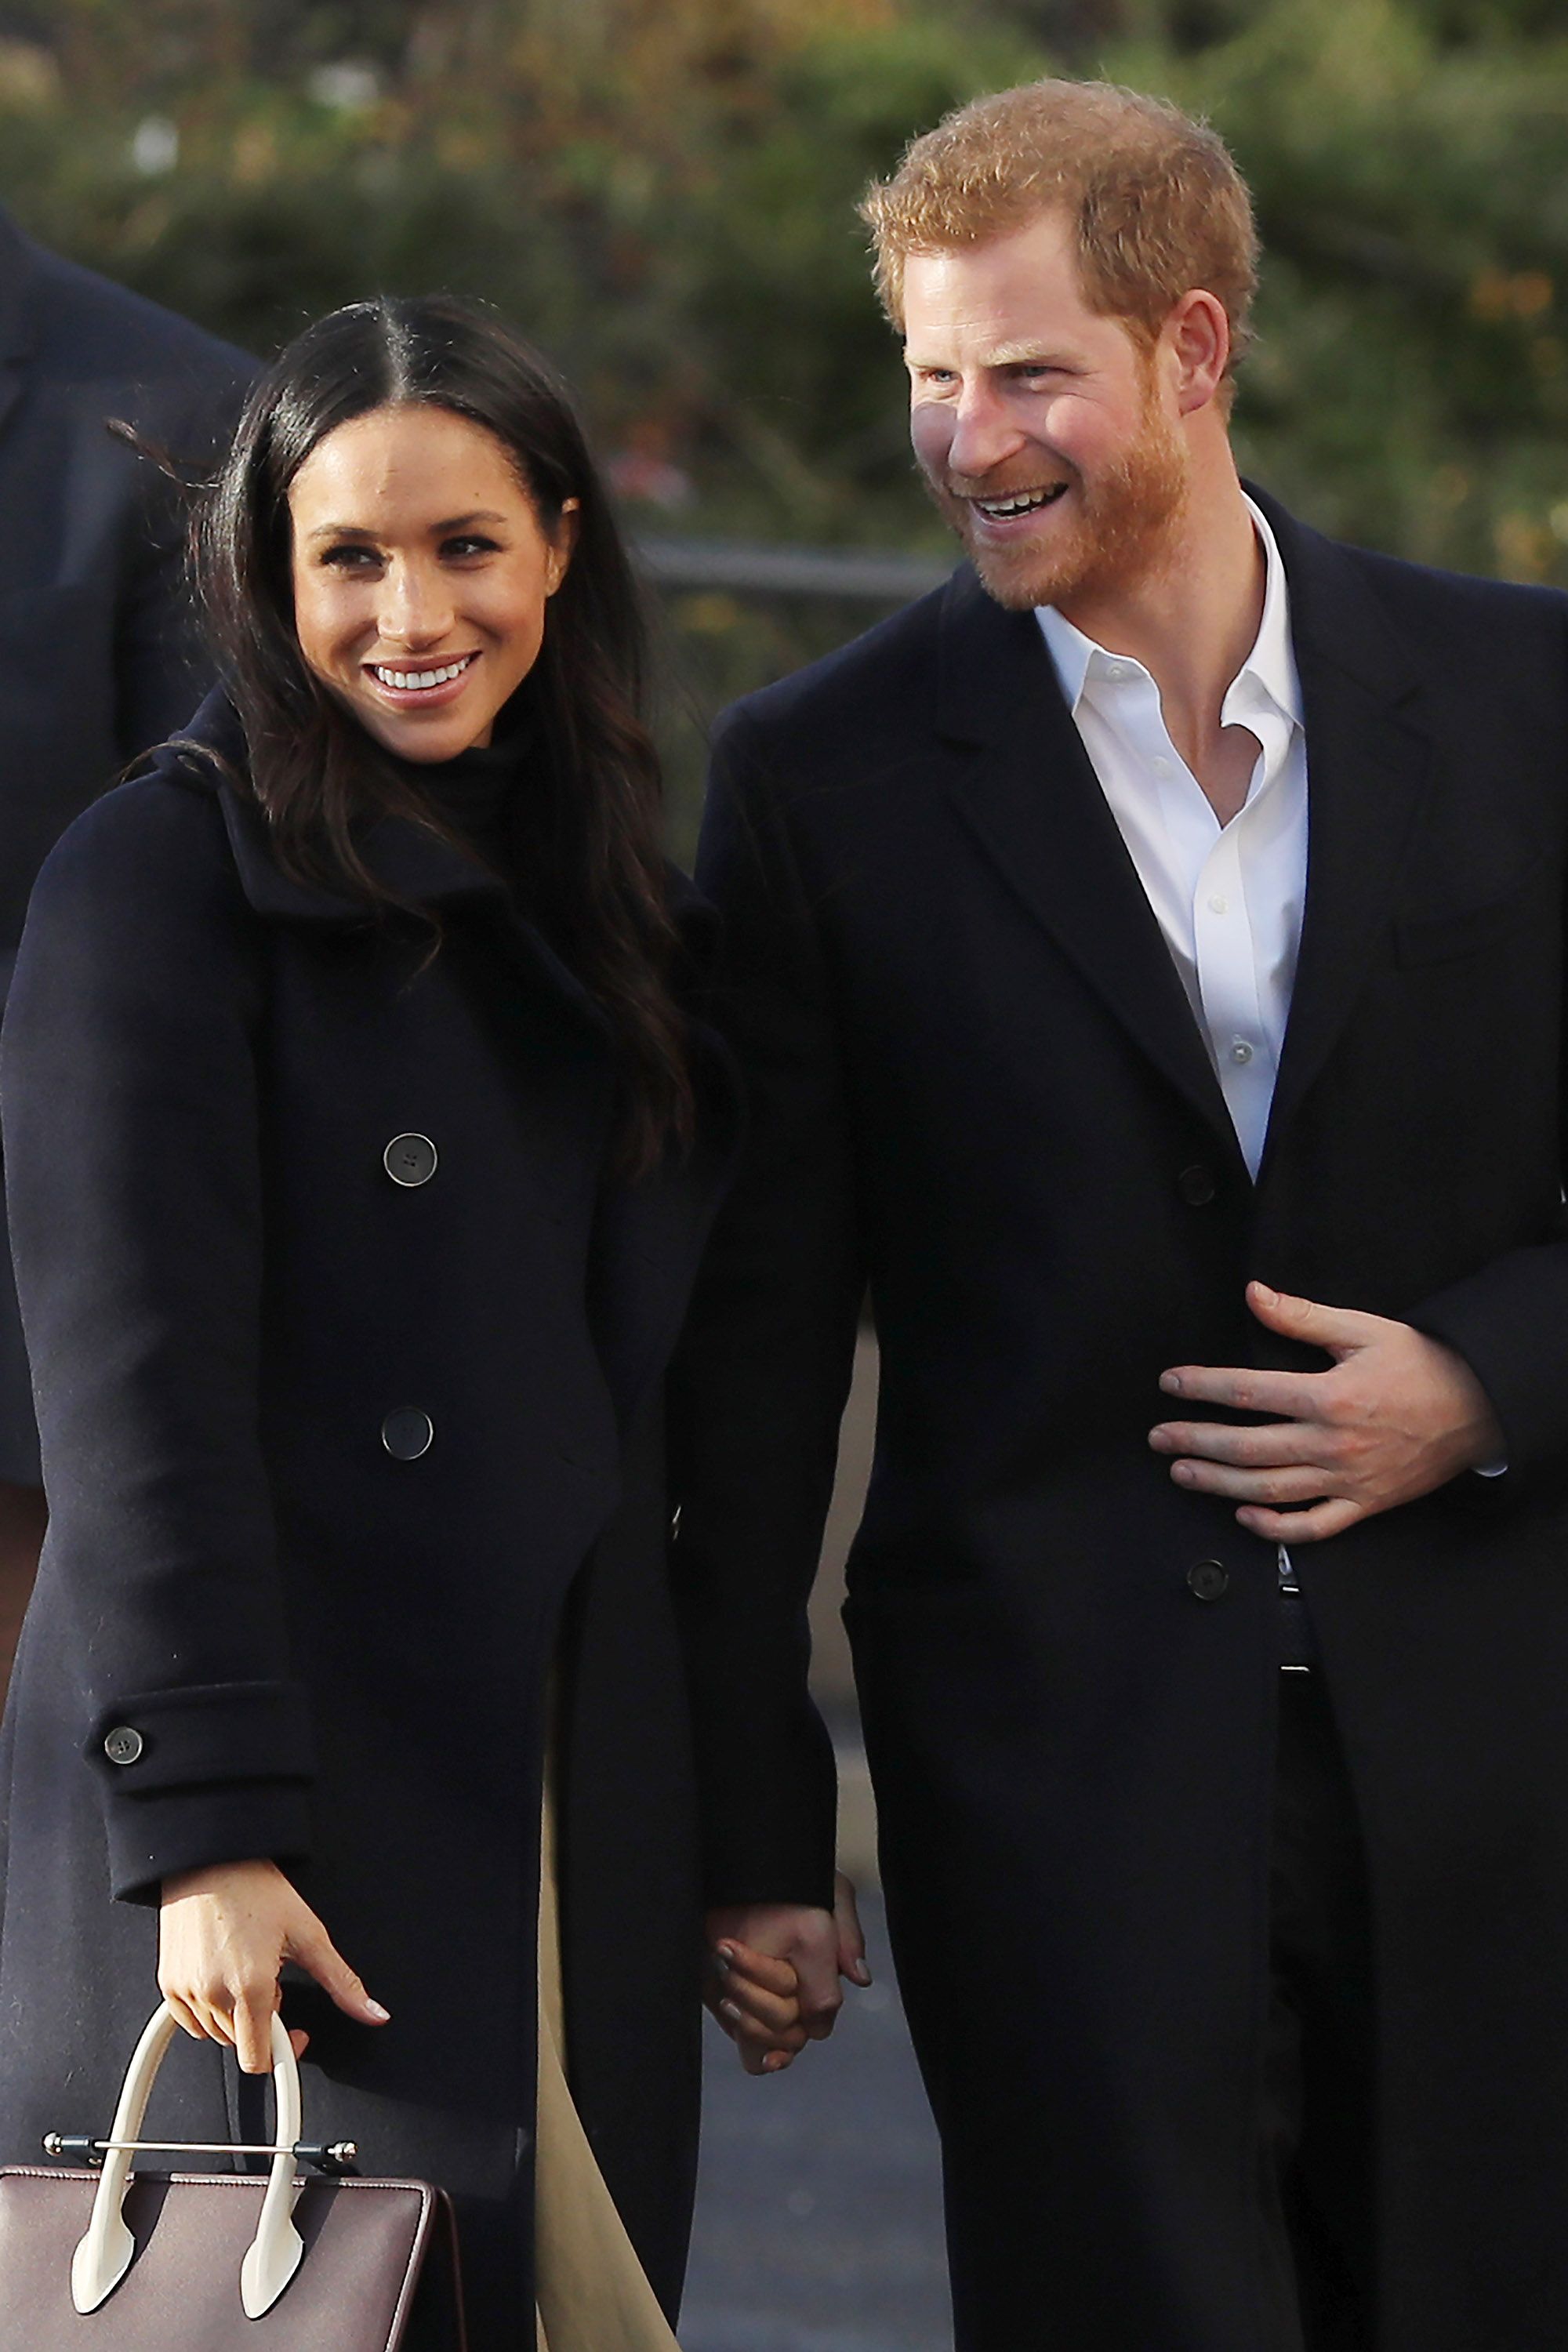 https://hips.hearstapps.com/hmg-prod.s3.amazonaws.com/images/hbz-prince-harry-meghan-markle-cute-moments-gettyimages-883563584-1523378902.jpg?crop=1xw:1xh;center,top